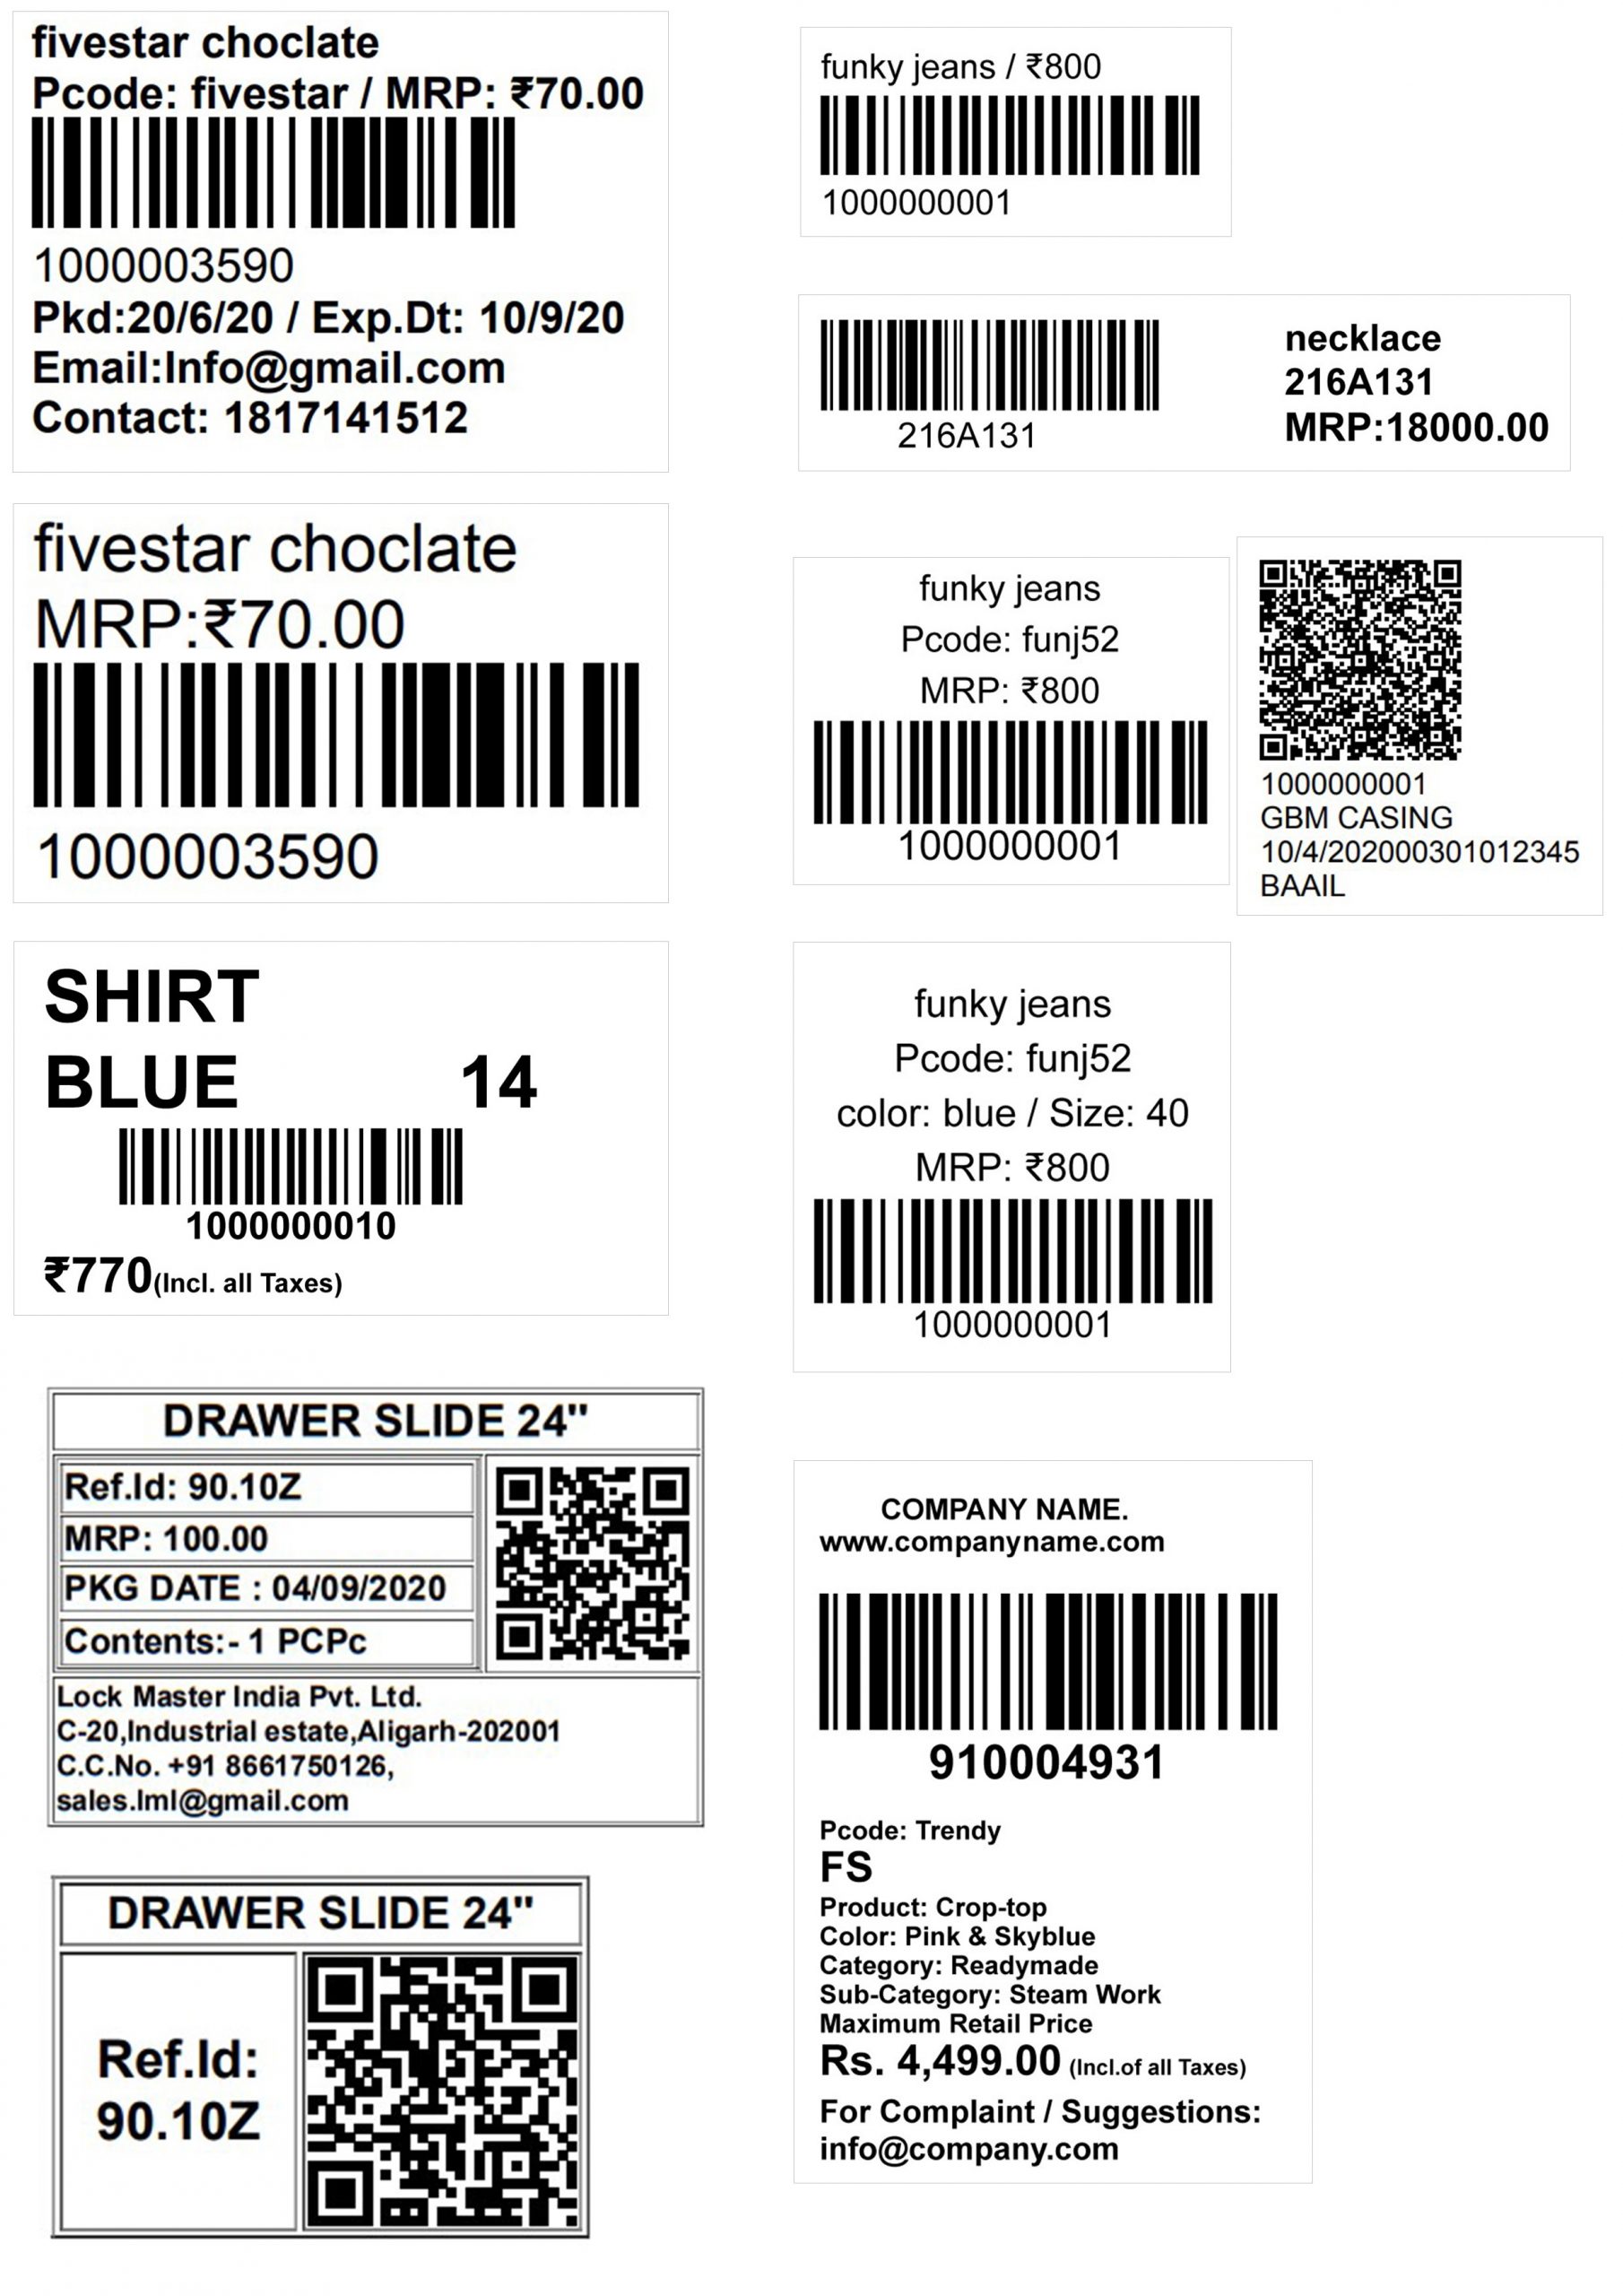 Barcode and QR Code Label Samples from Retailcore software RetailCore